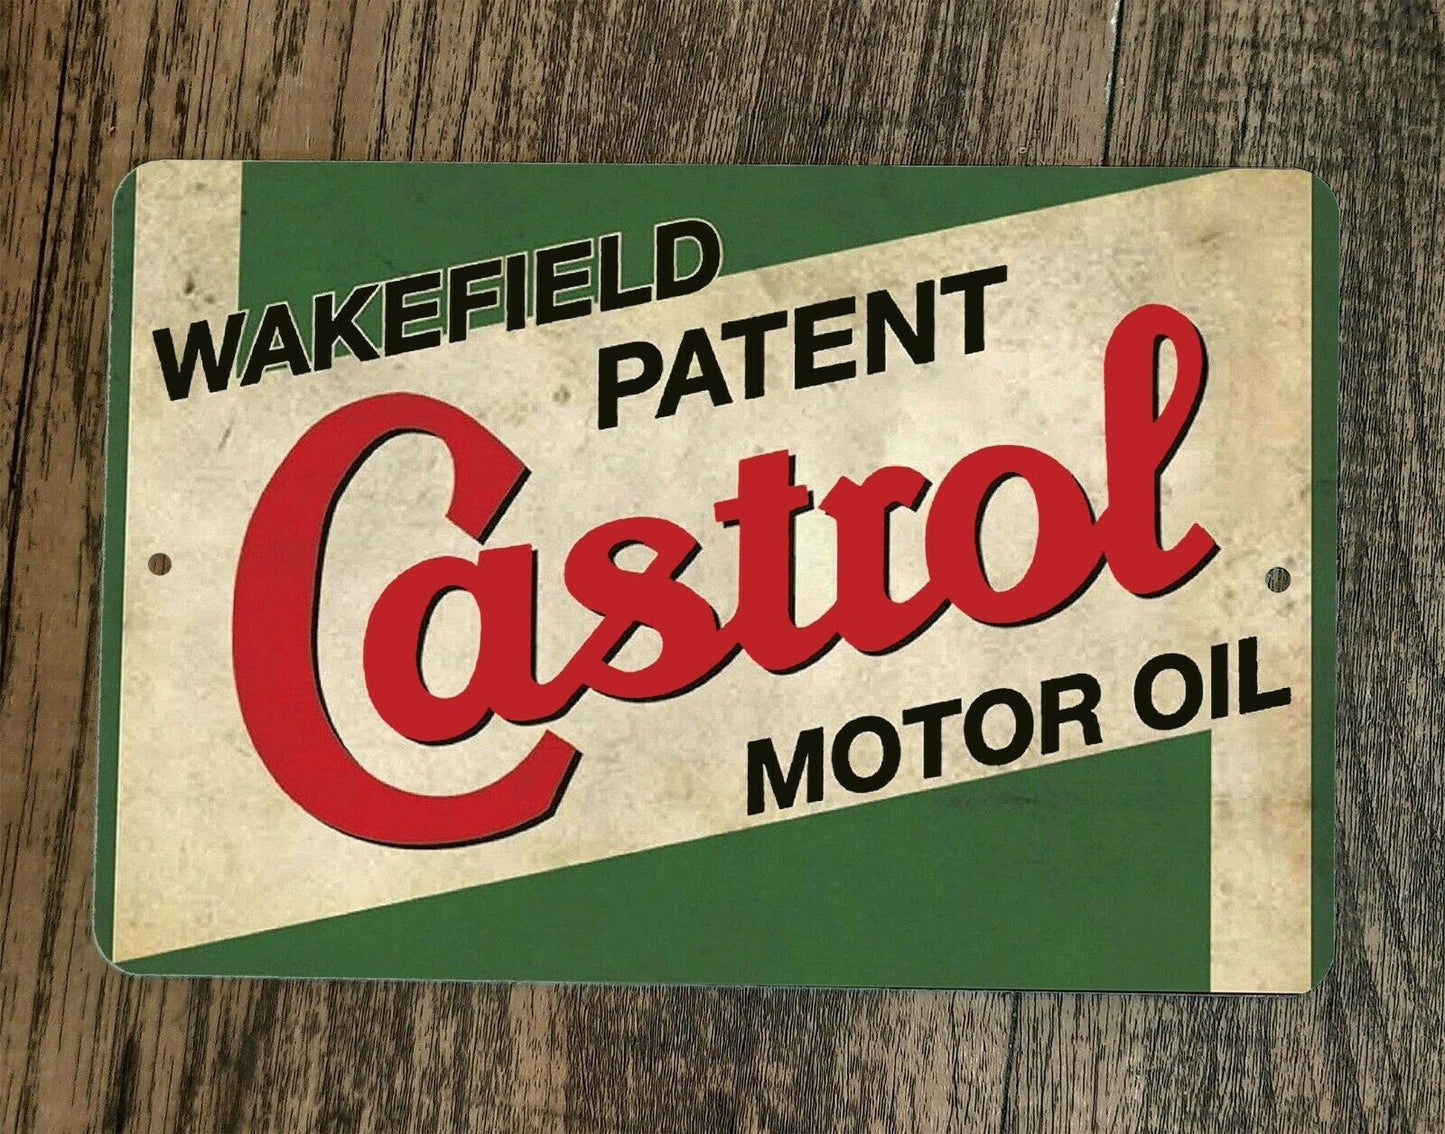 Wakefield Patent Castrol Motor Oil 8x12 Metal Wall Vintage Sign Garage Poster